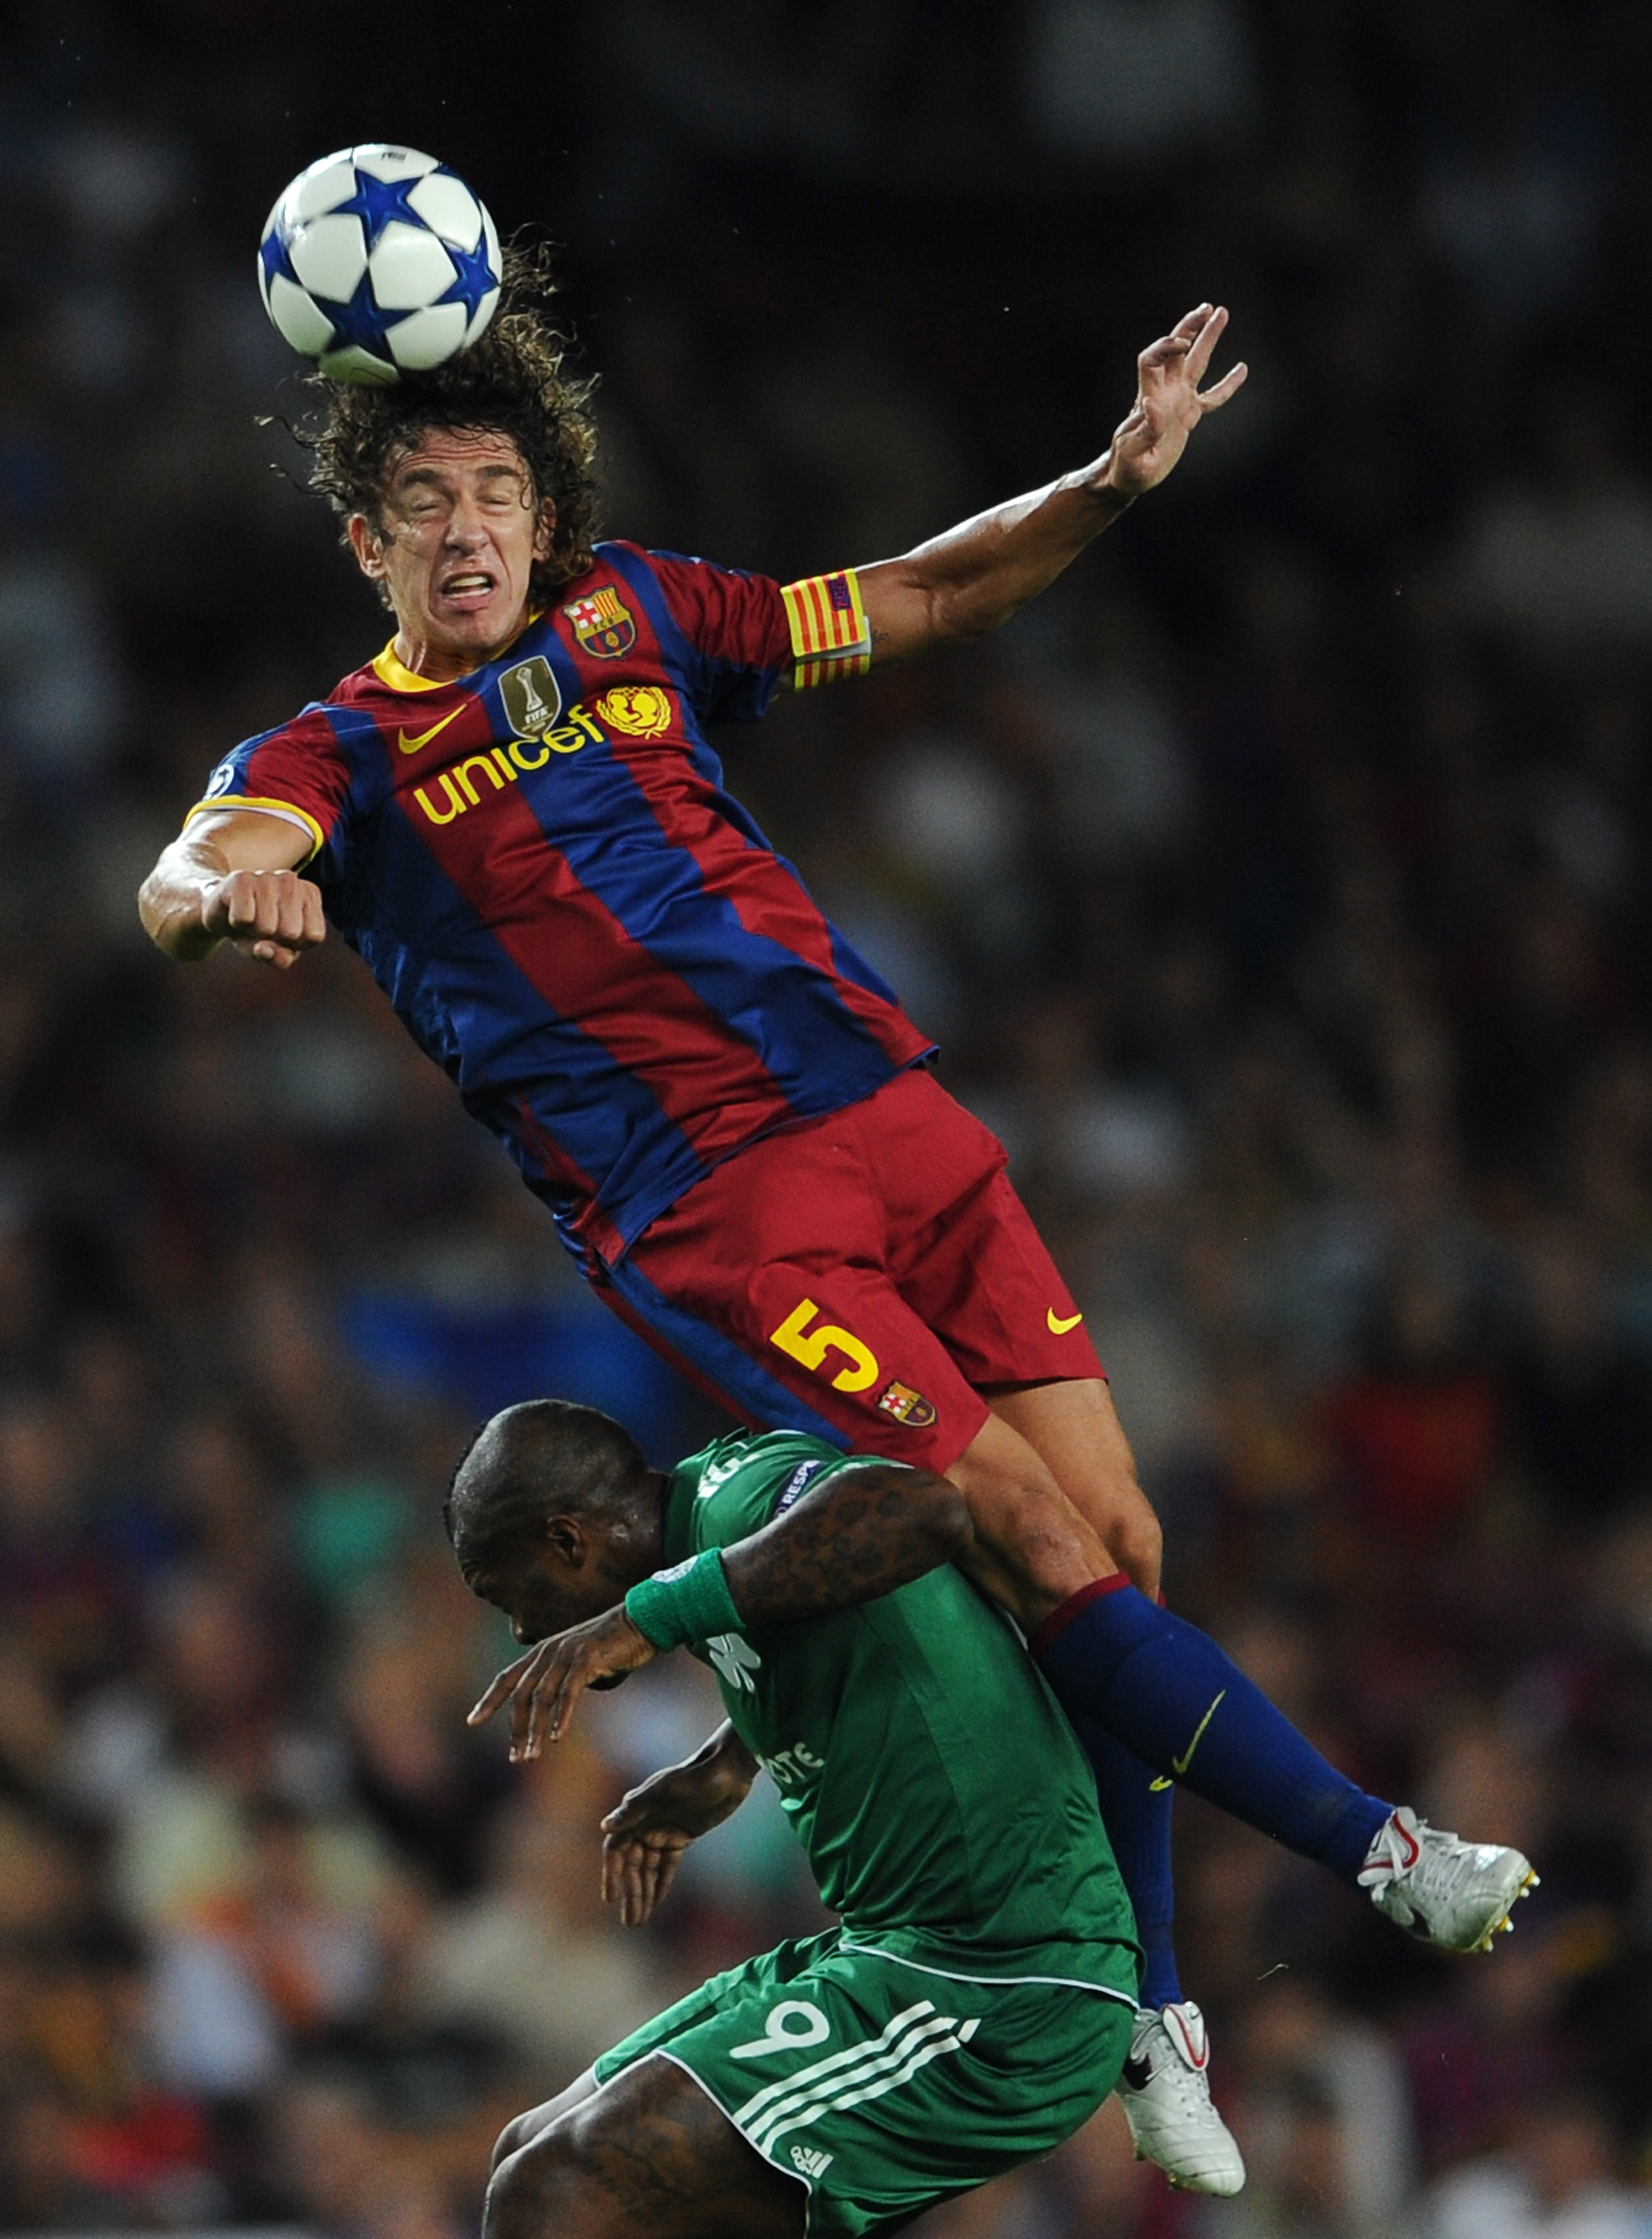 BARCELONA, SPAIN - SEPTEMBER 14:  Carles Puyol of Barcelona duels for a high ball with Djibril Cisse of Panathinaikos during the UEFA Champions League group D match between Barcelona and Panathinaikos on September 14, 2010 in Barcelona, Spain. Barcelona w